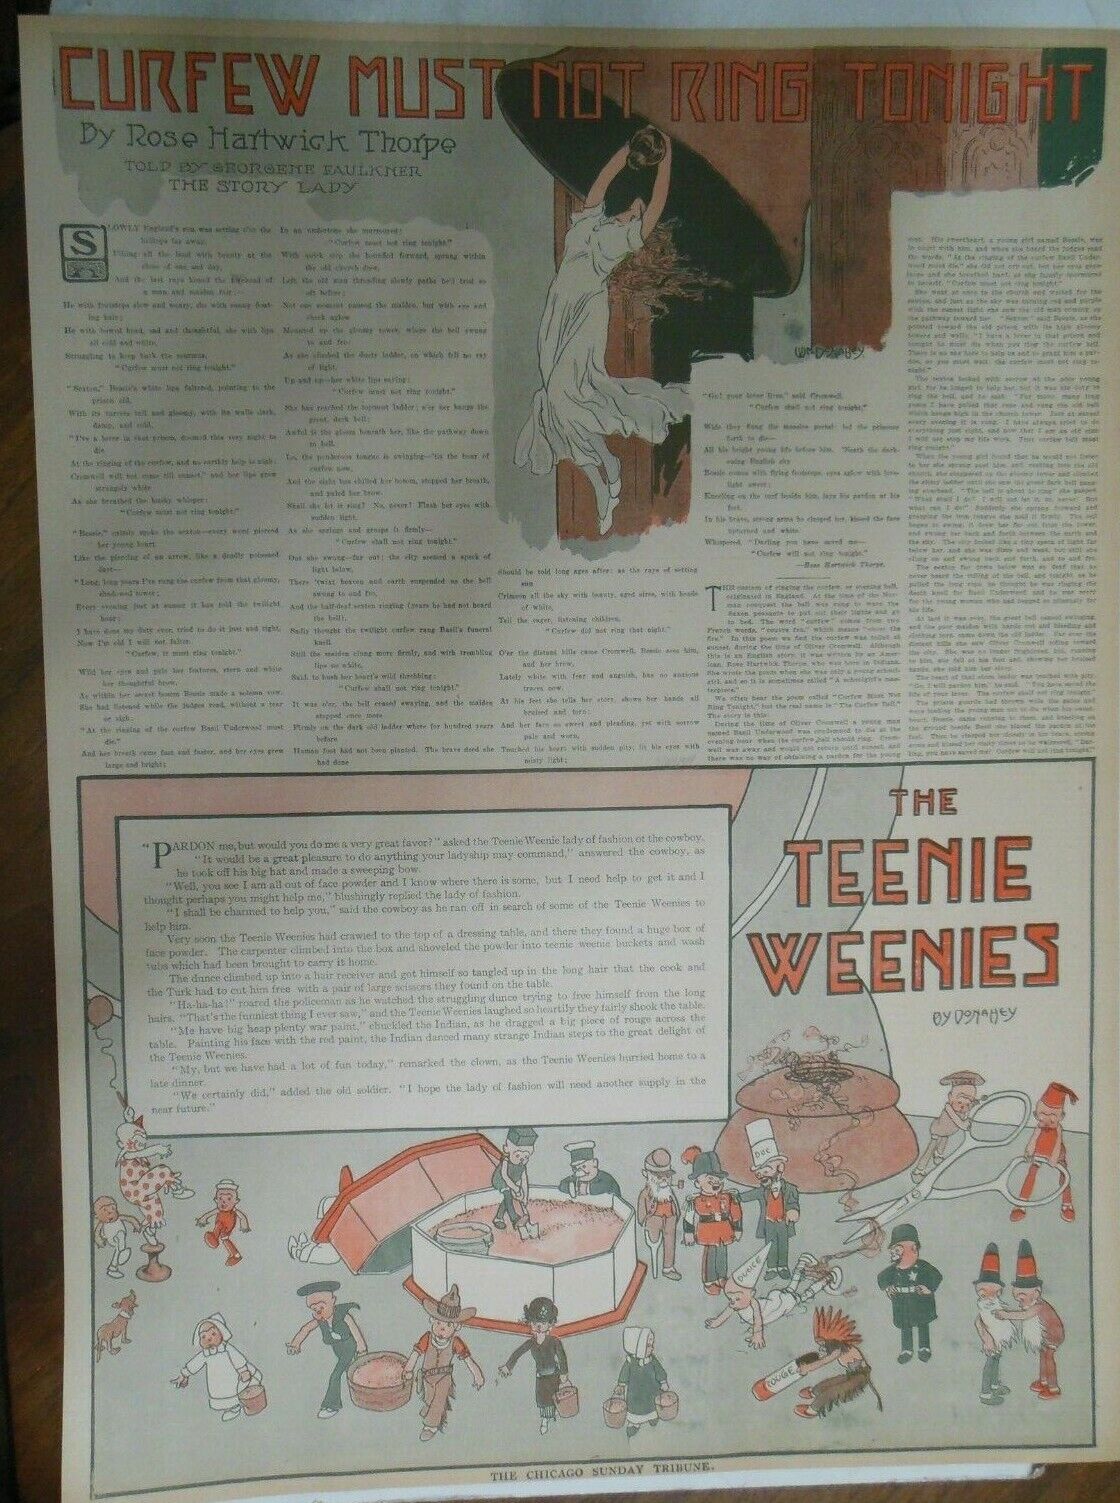 The Teenie Weenies Sunday by Wm. Donahey from 9/20/1914 Full Page Size Year #1